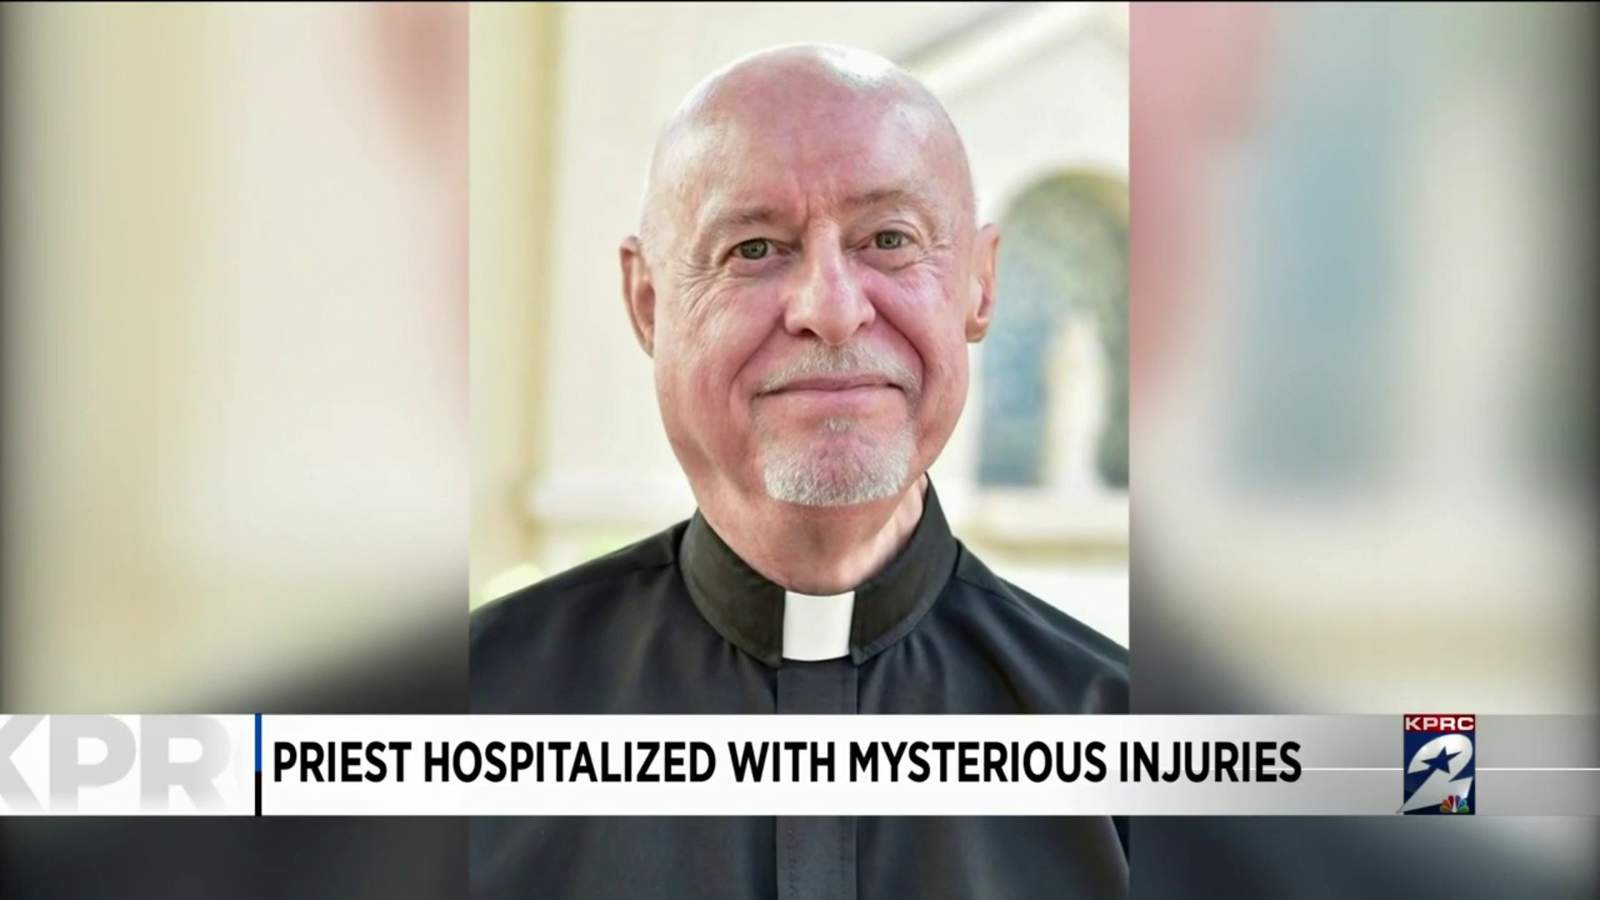 Community seeking prayers for priest hospitalized with mysterious injuries